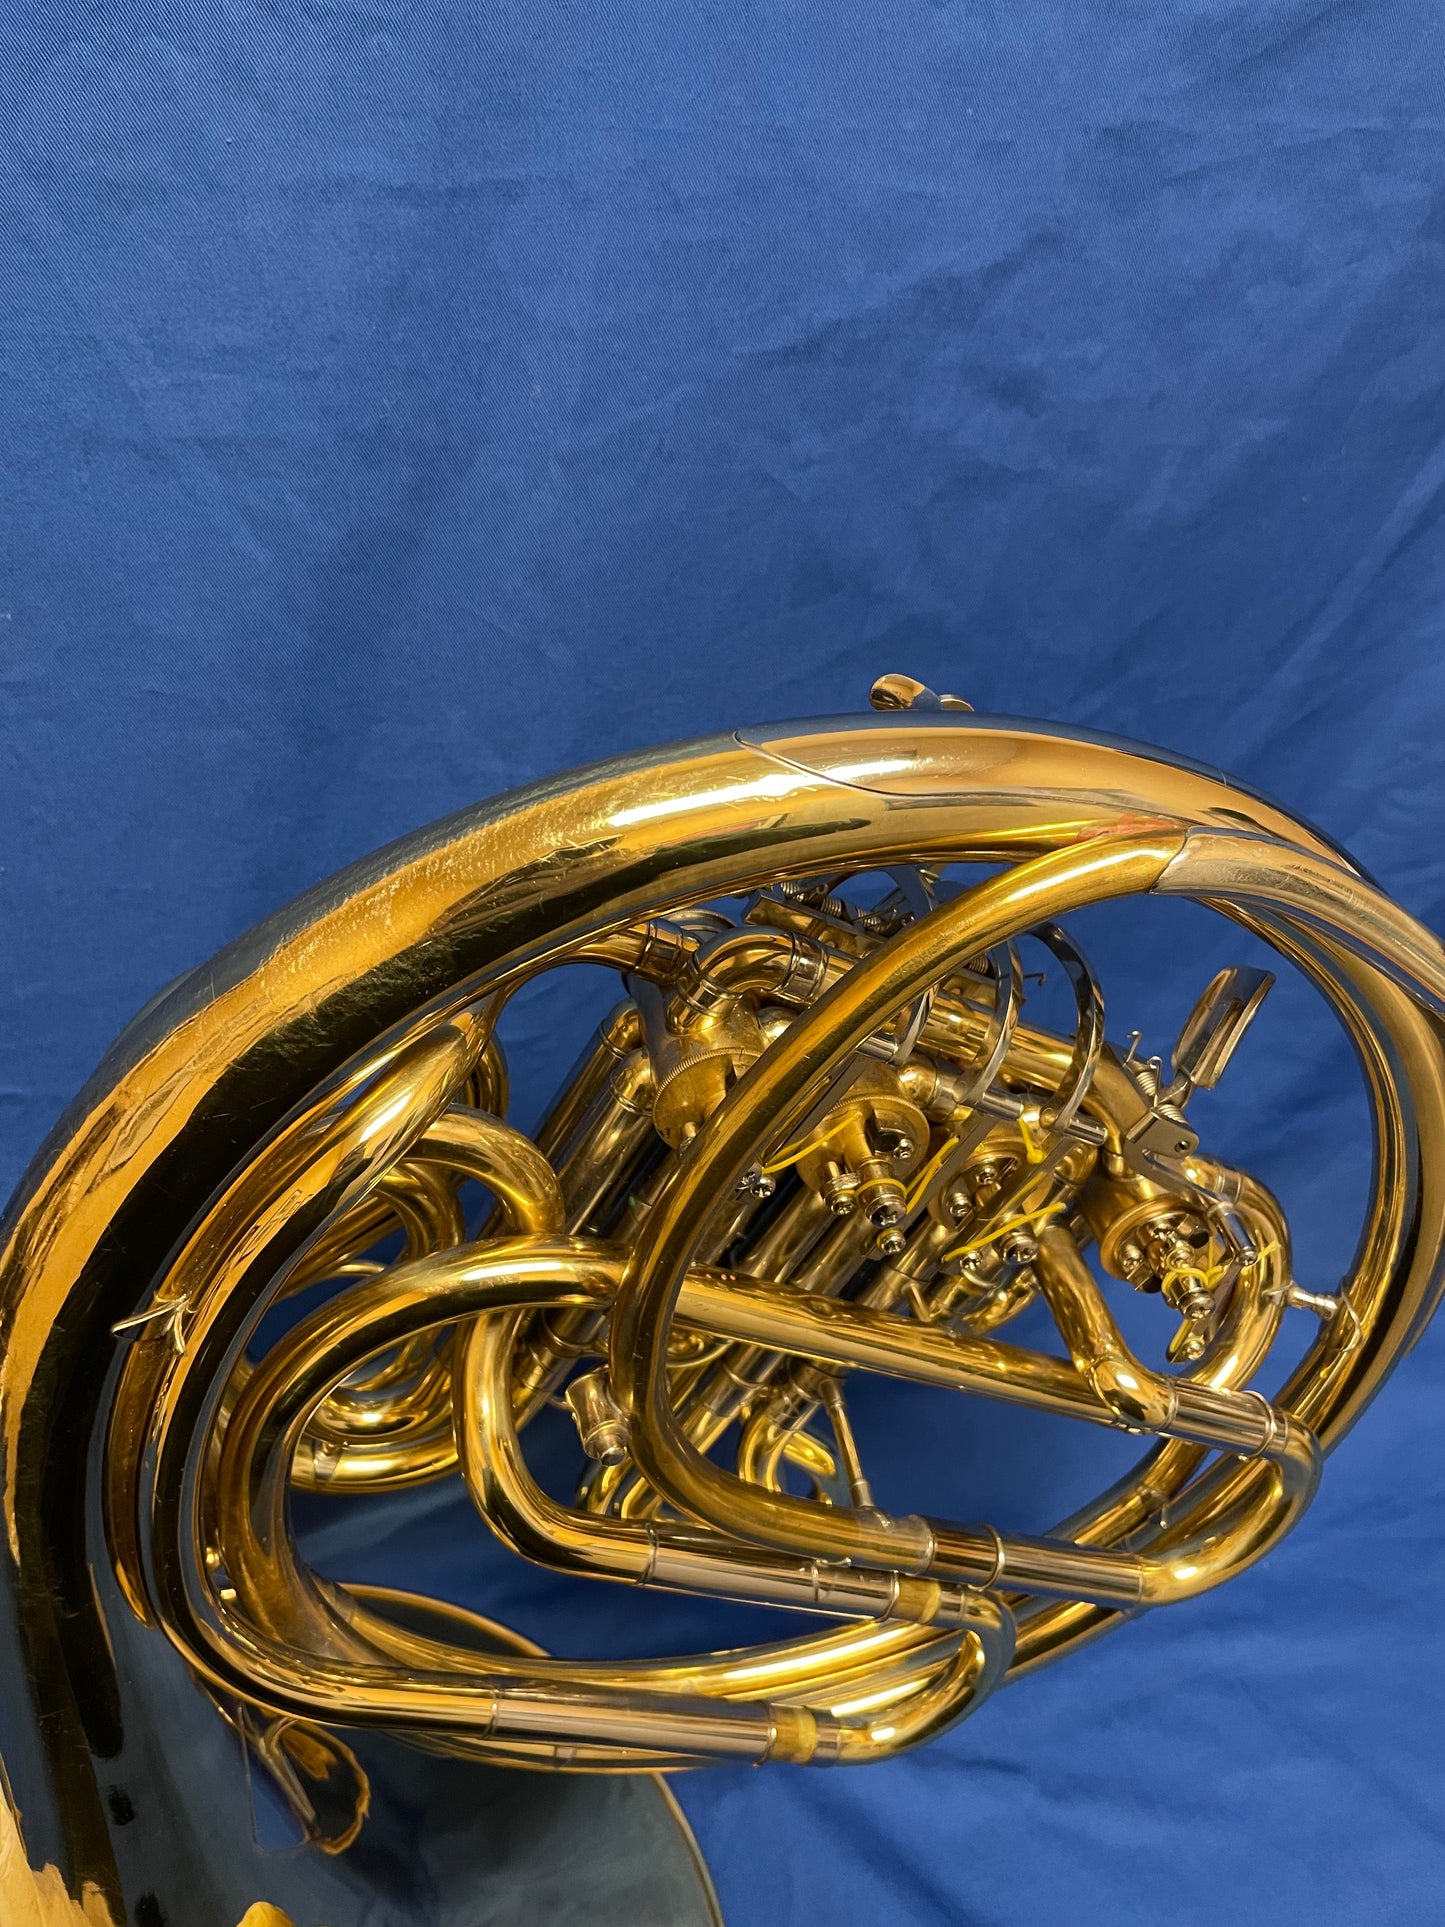 Pre-Owned Yamaha YHR-664 French Horn